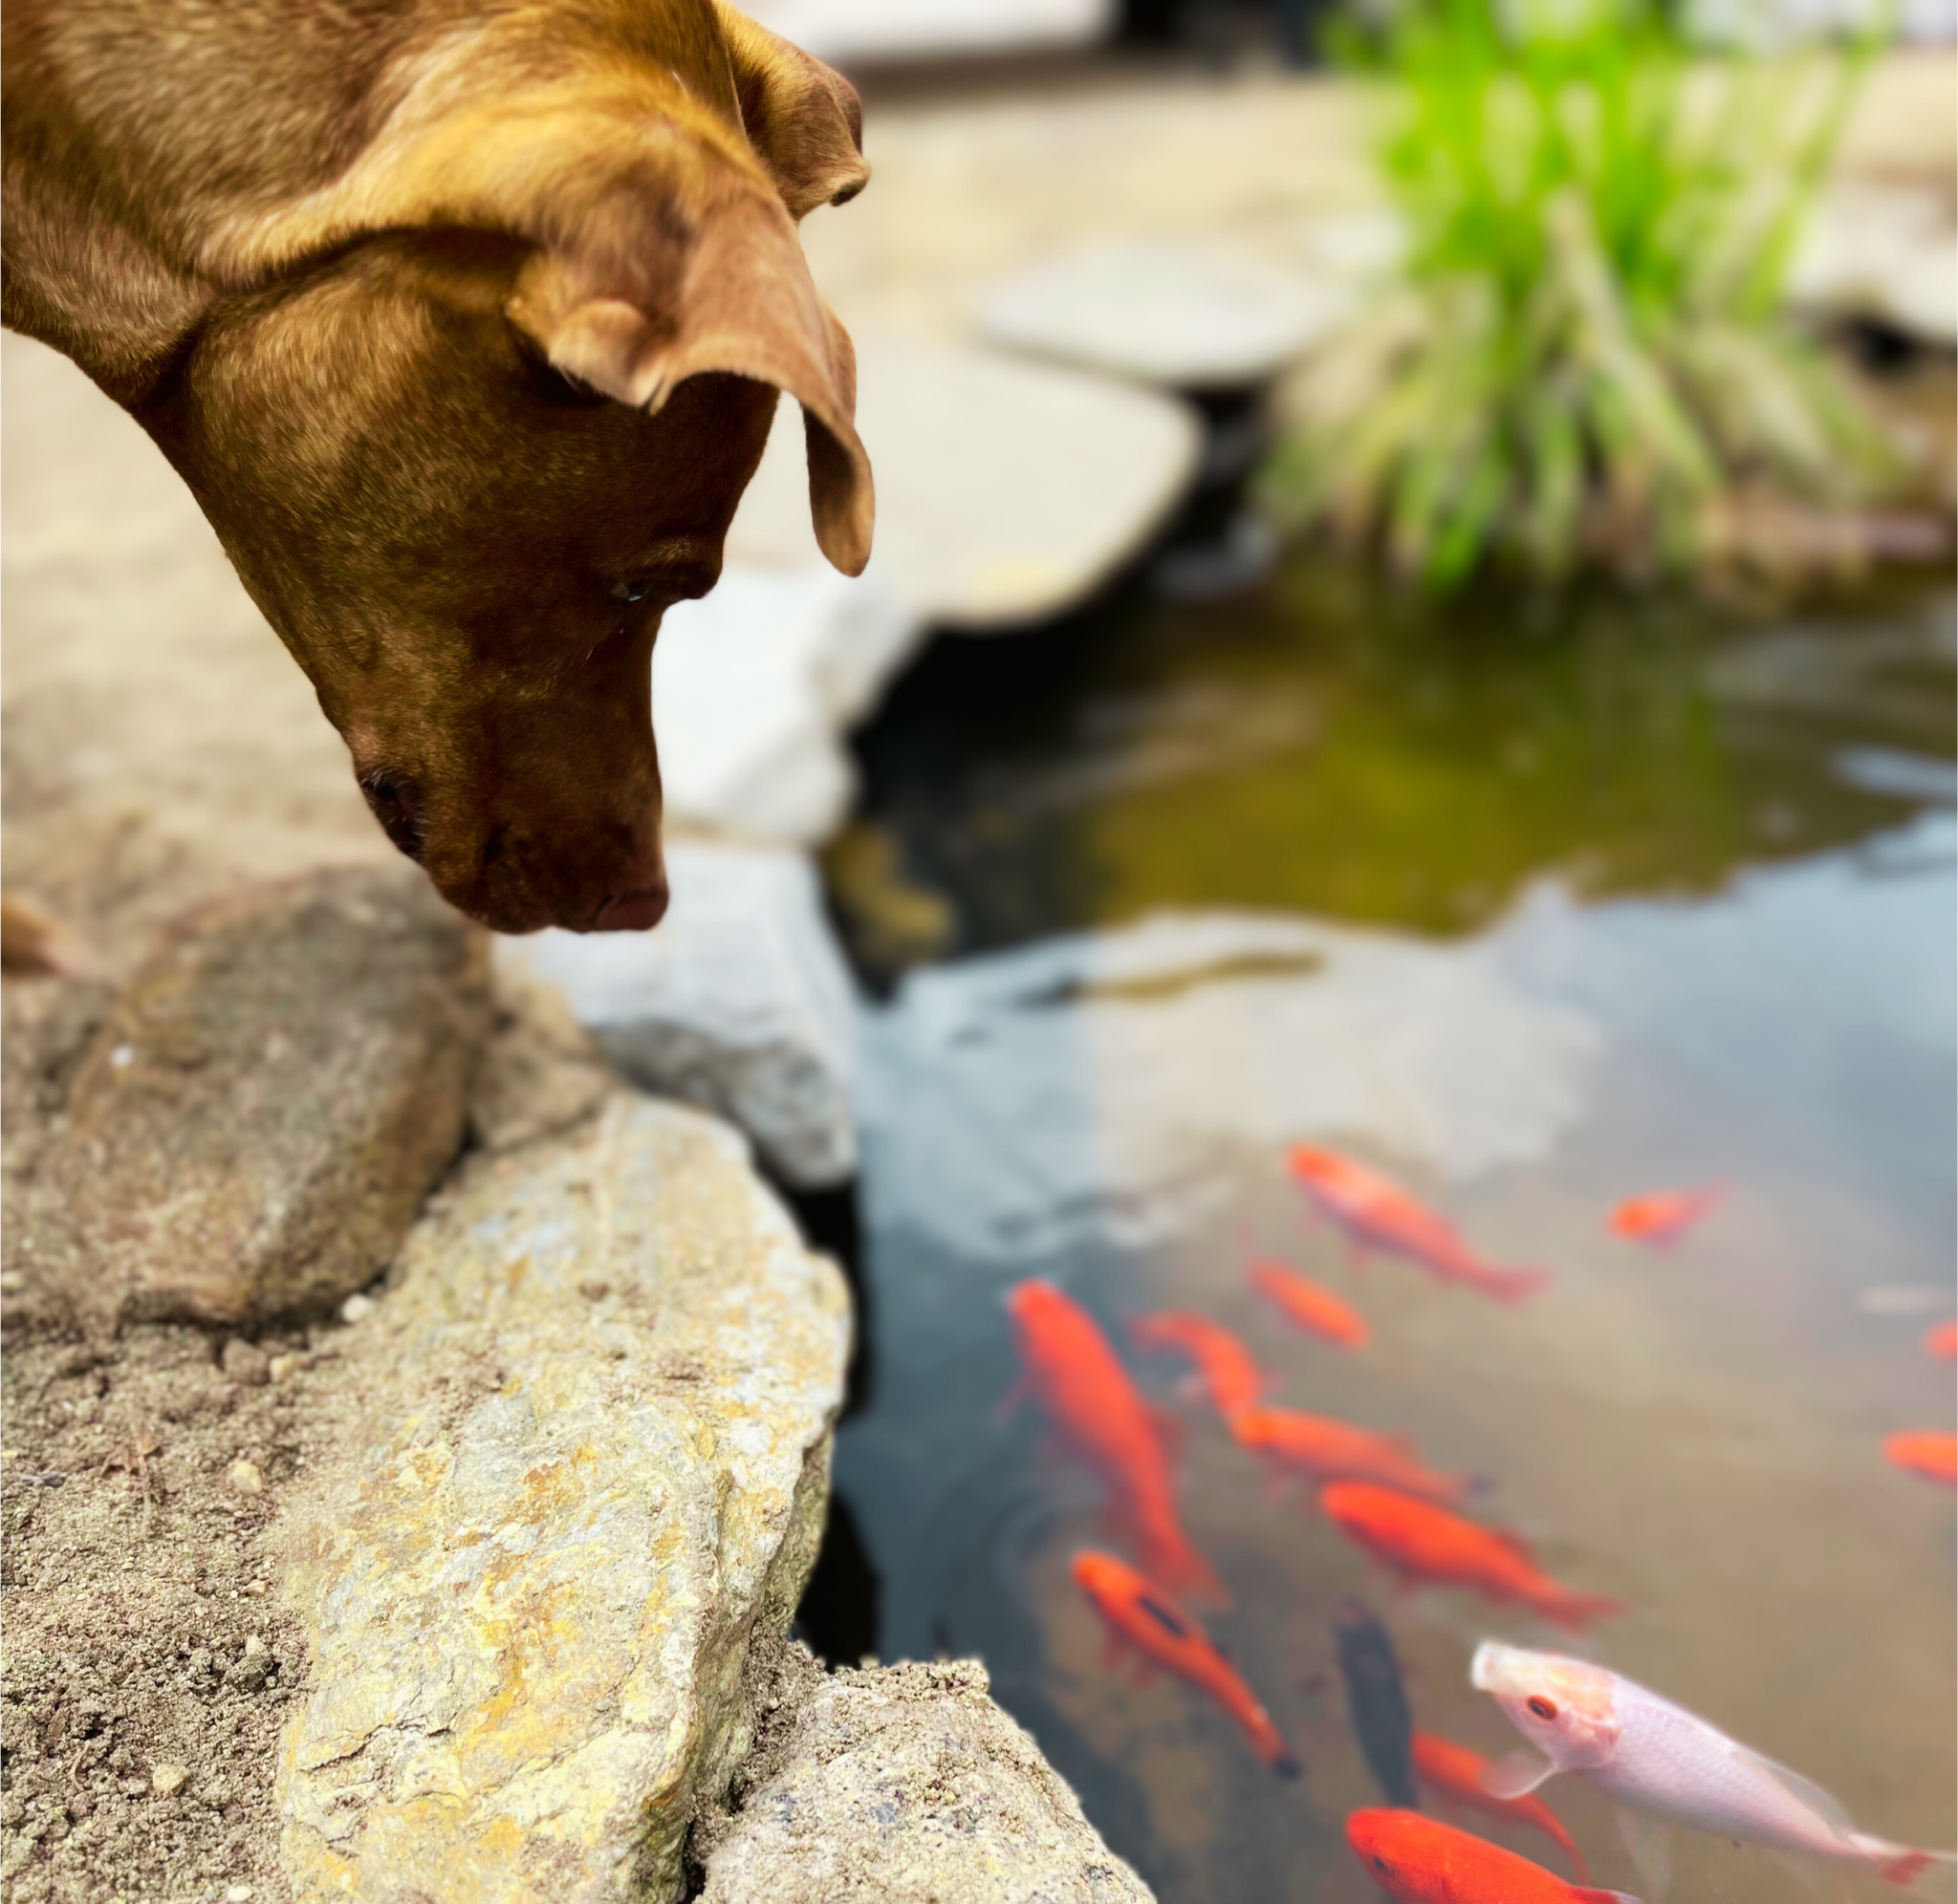 Our dog Maggie looking at the fish in our homemade pond